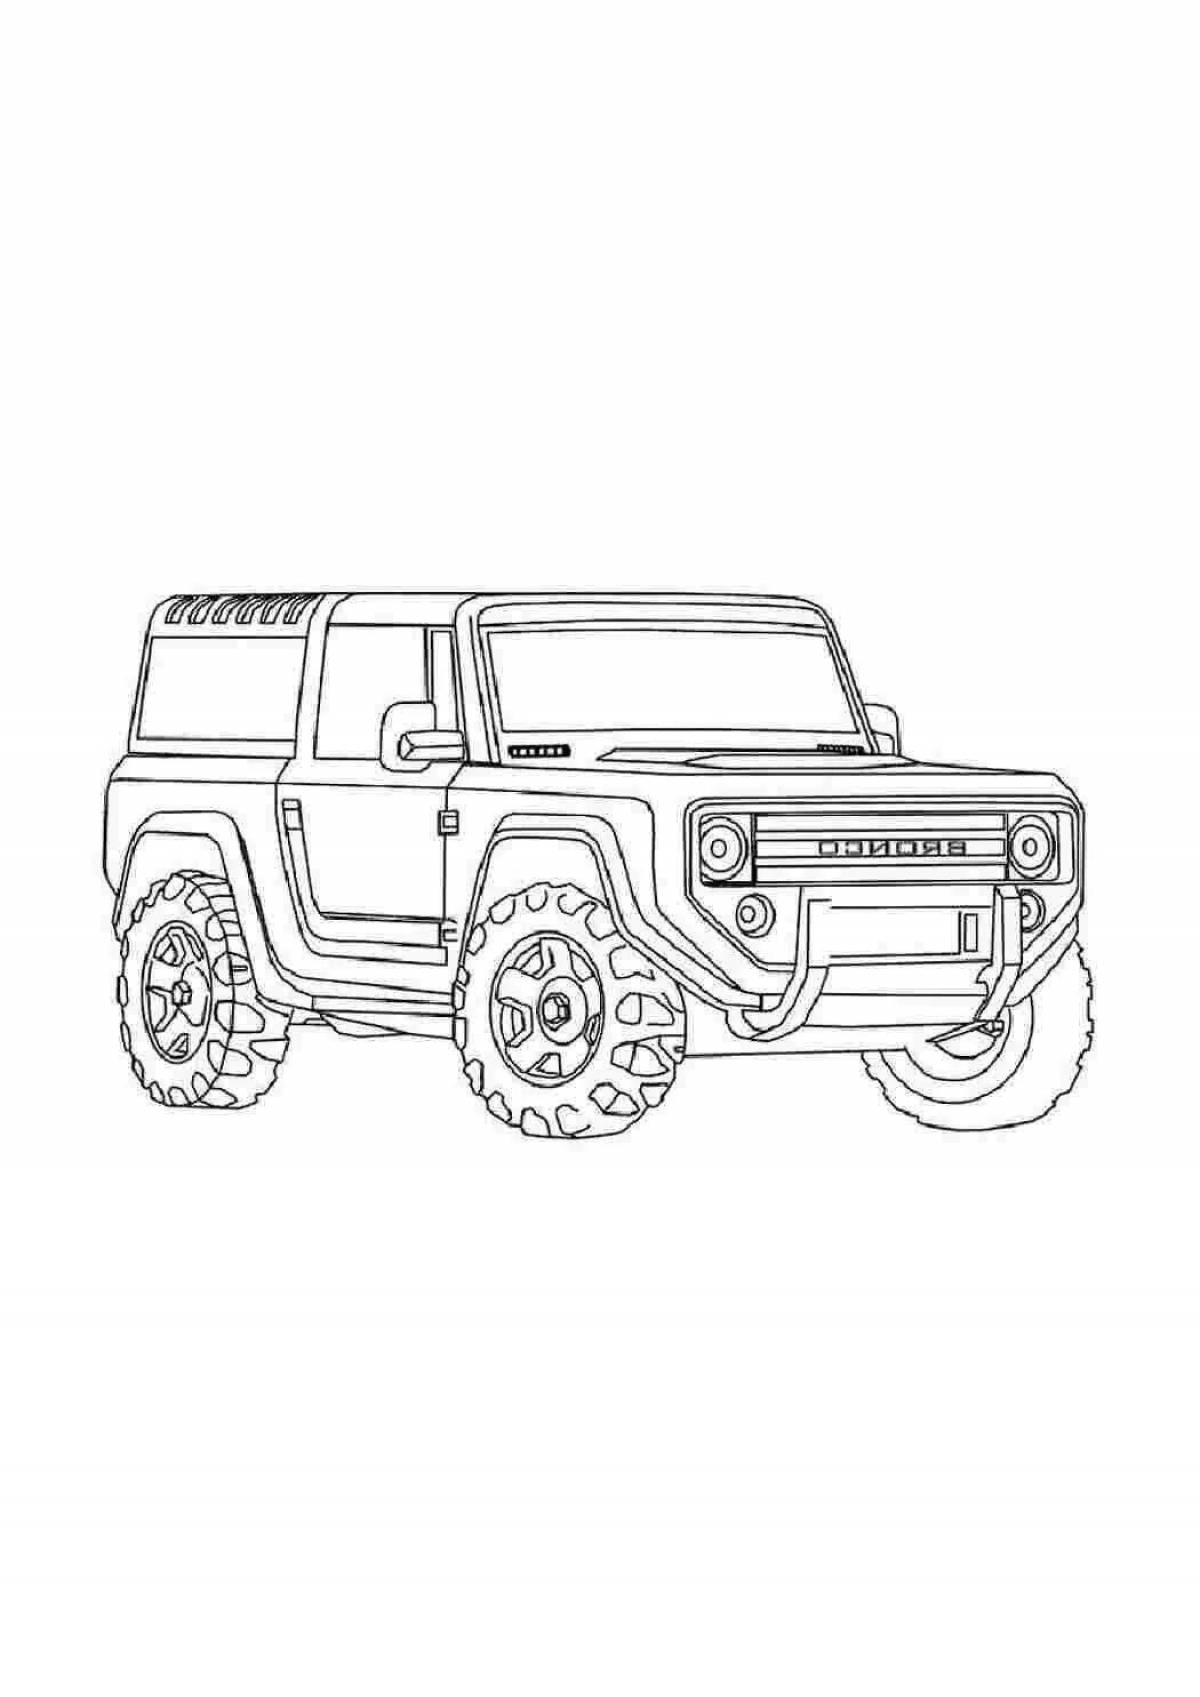 Charming helik cars coloring book for boys